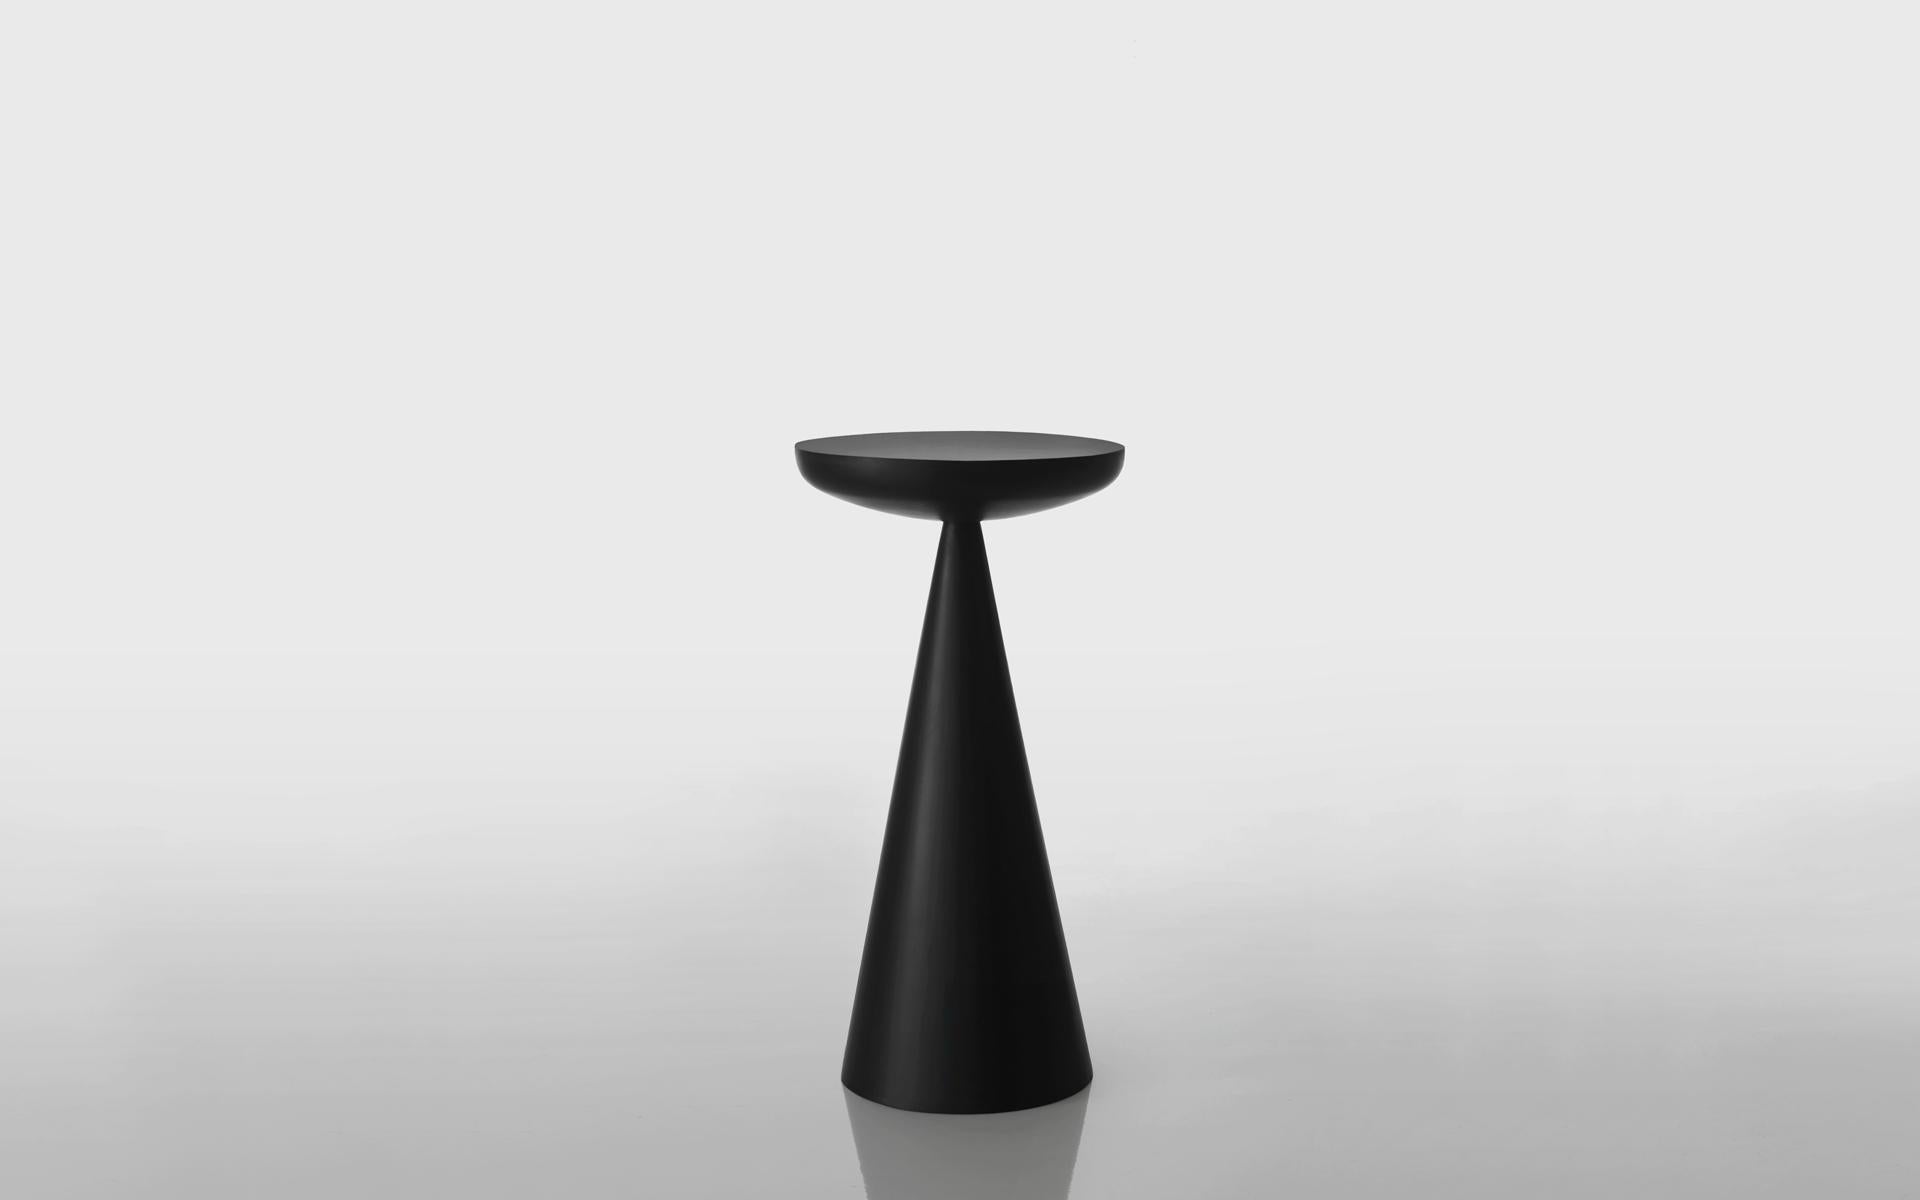 Miss table by Imperfettolab
Dimensions: Ø 49 x H 98 cm
Materials: Fiberglass

Imperfetto Lab
Who we are ? We are a family.
Verter Turroni, Emanuela Ravelli and our children Elia, Margherita and Eusebio.
All together, we are separate parts and